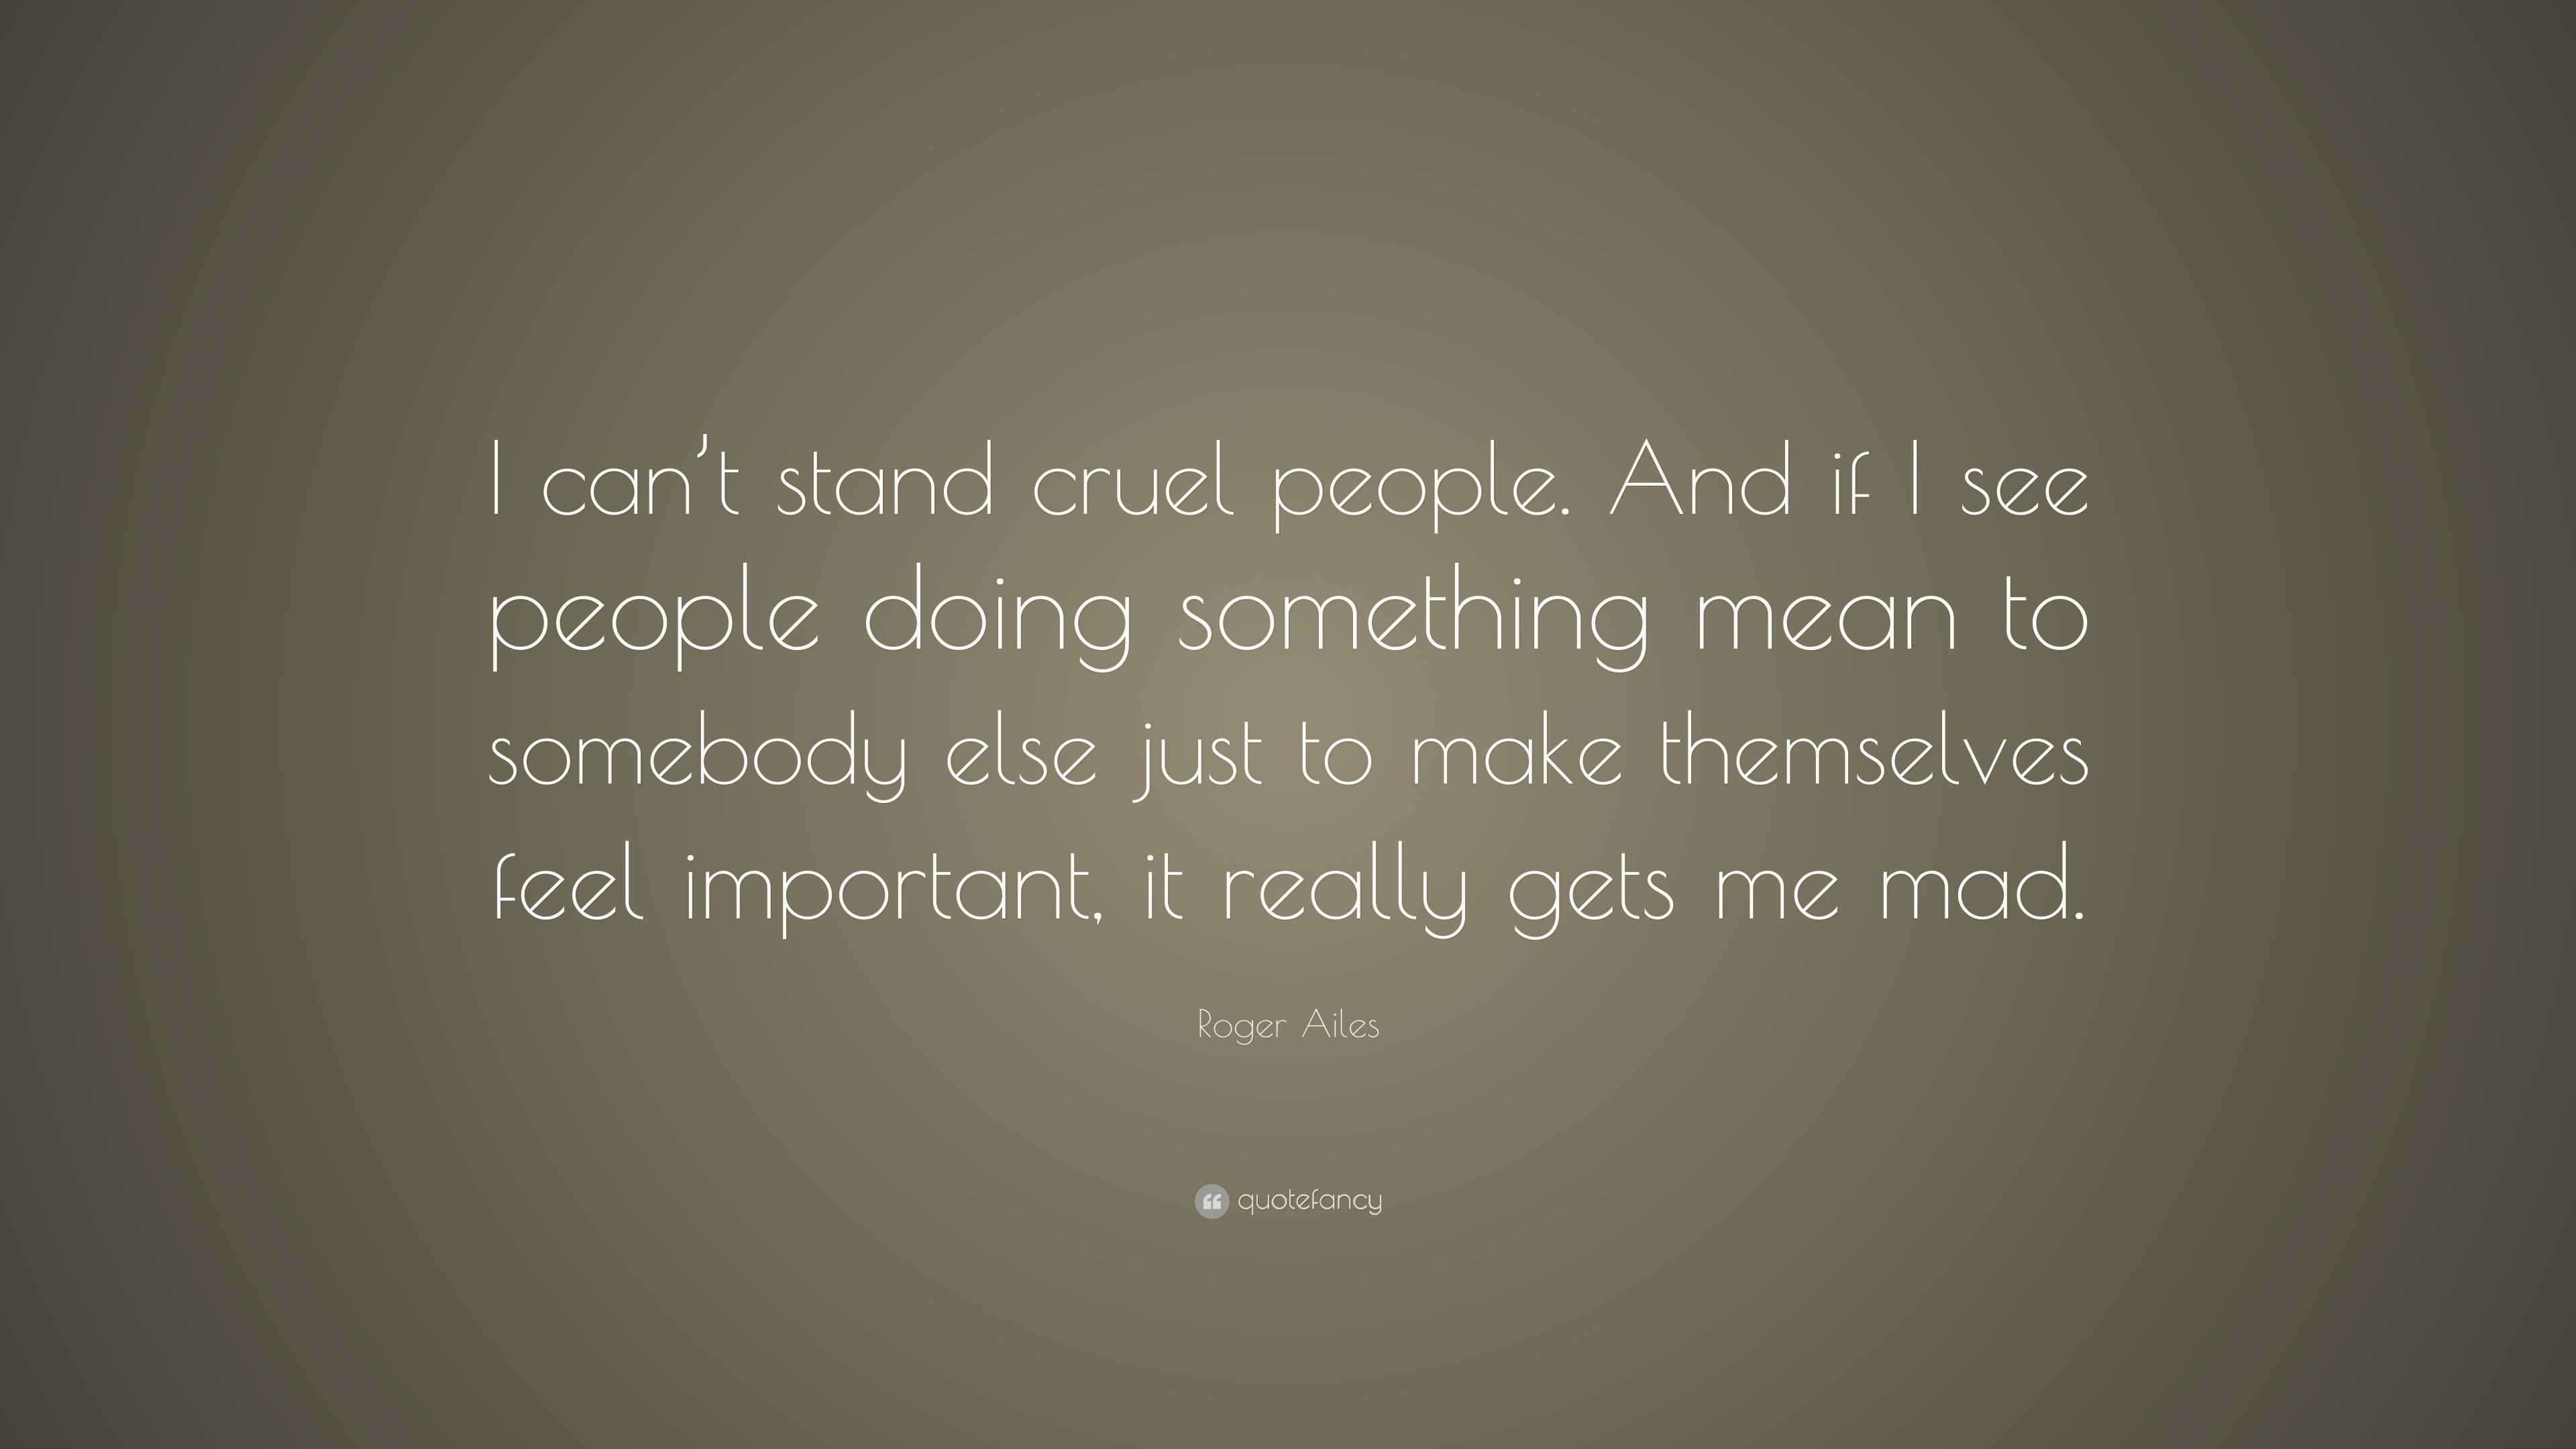 Roger Ailes Quote: “I can’t stand cruel people. And if I see people ...